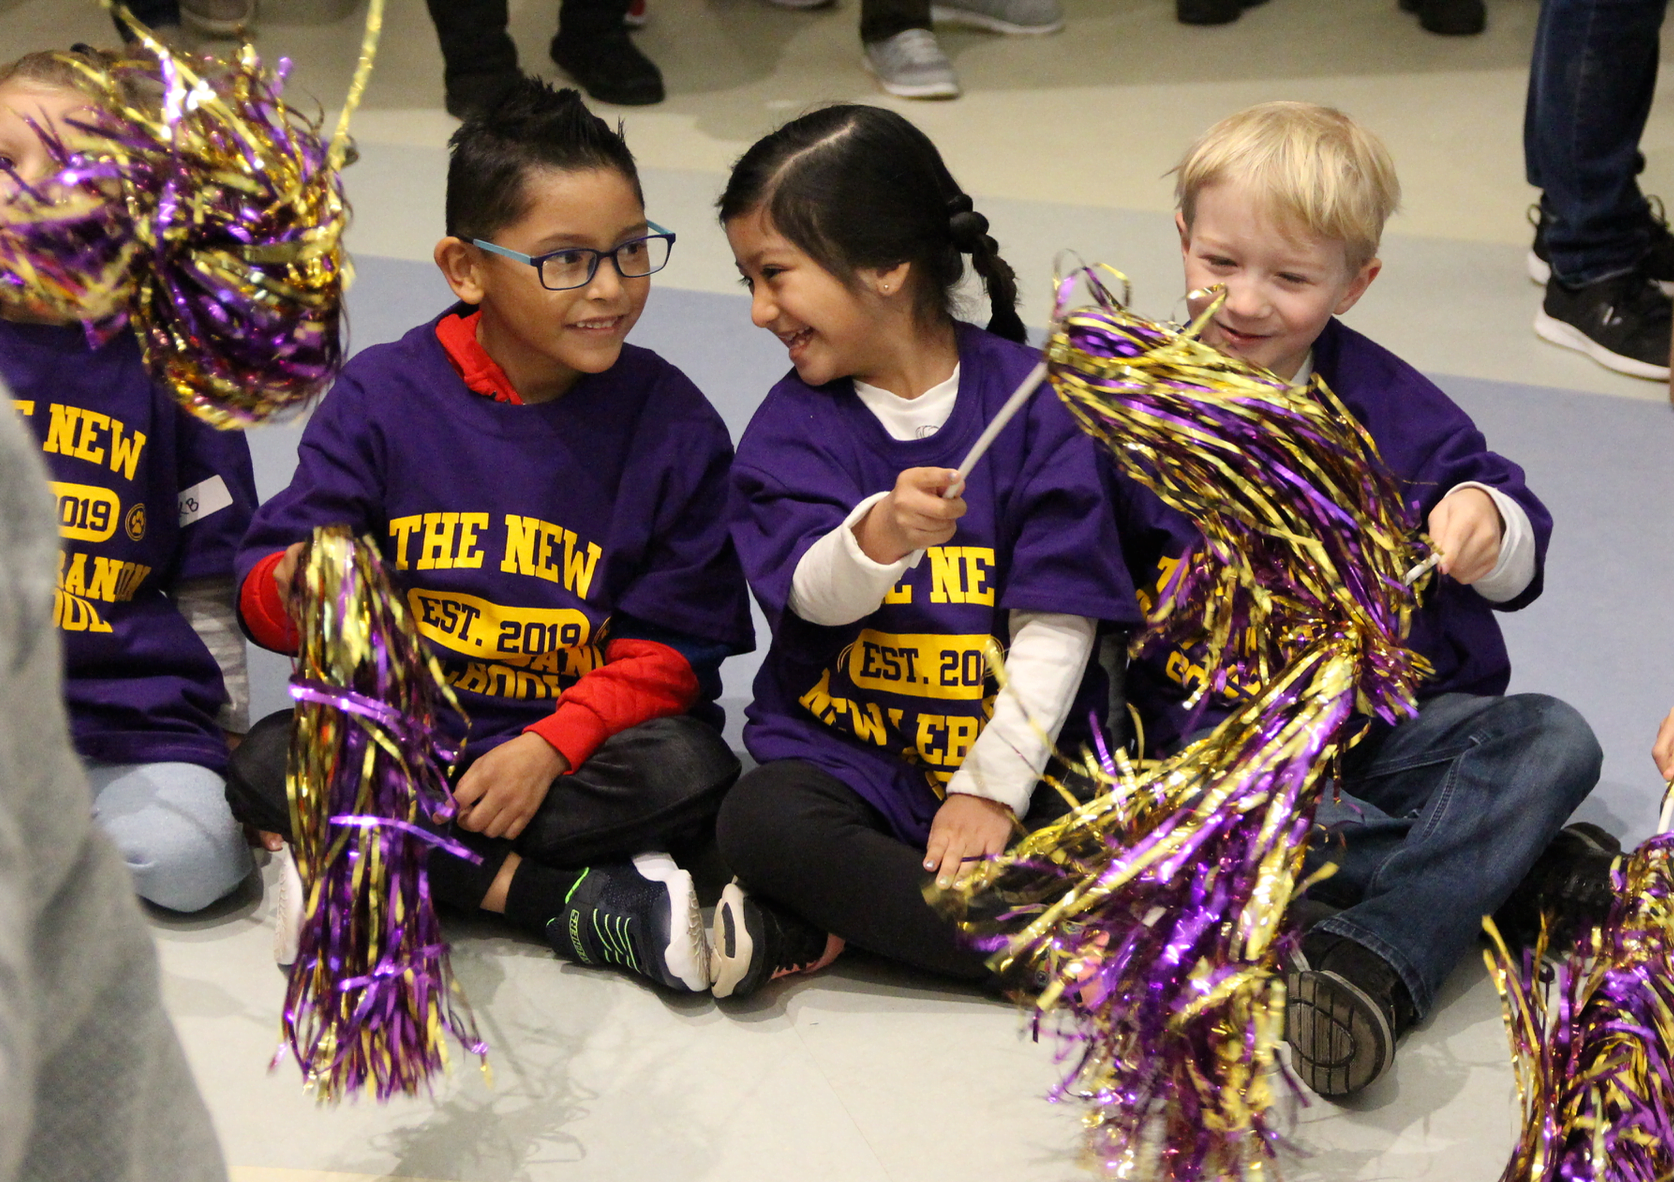 Students and staff were all in new purple and gold t-shirts and coordinating pom poms to celebrate the opening of the new New Lebanon School. Feb 20, 2019 Photo: Leslie Yager